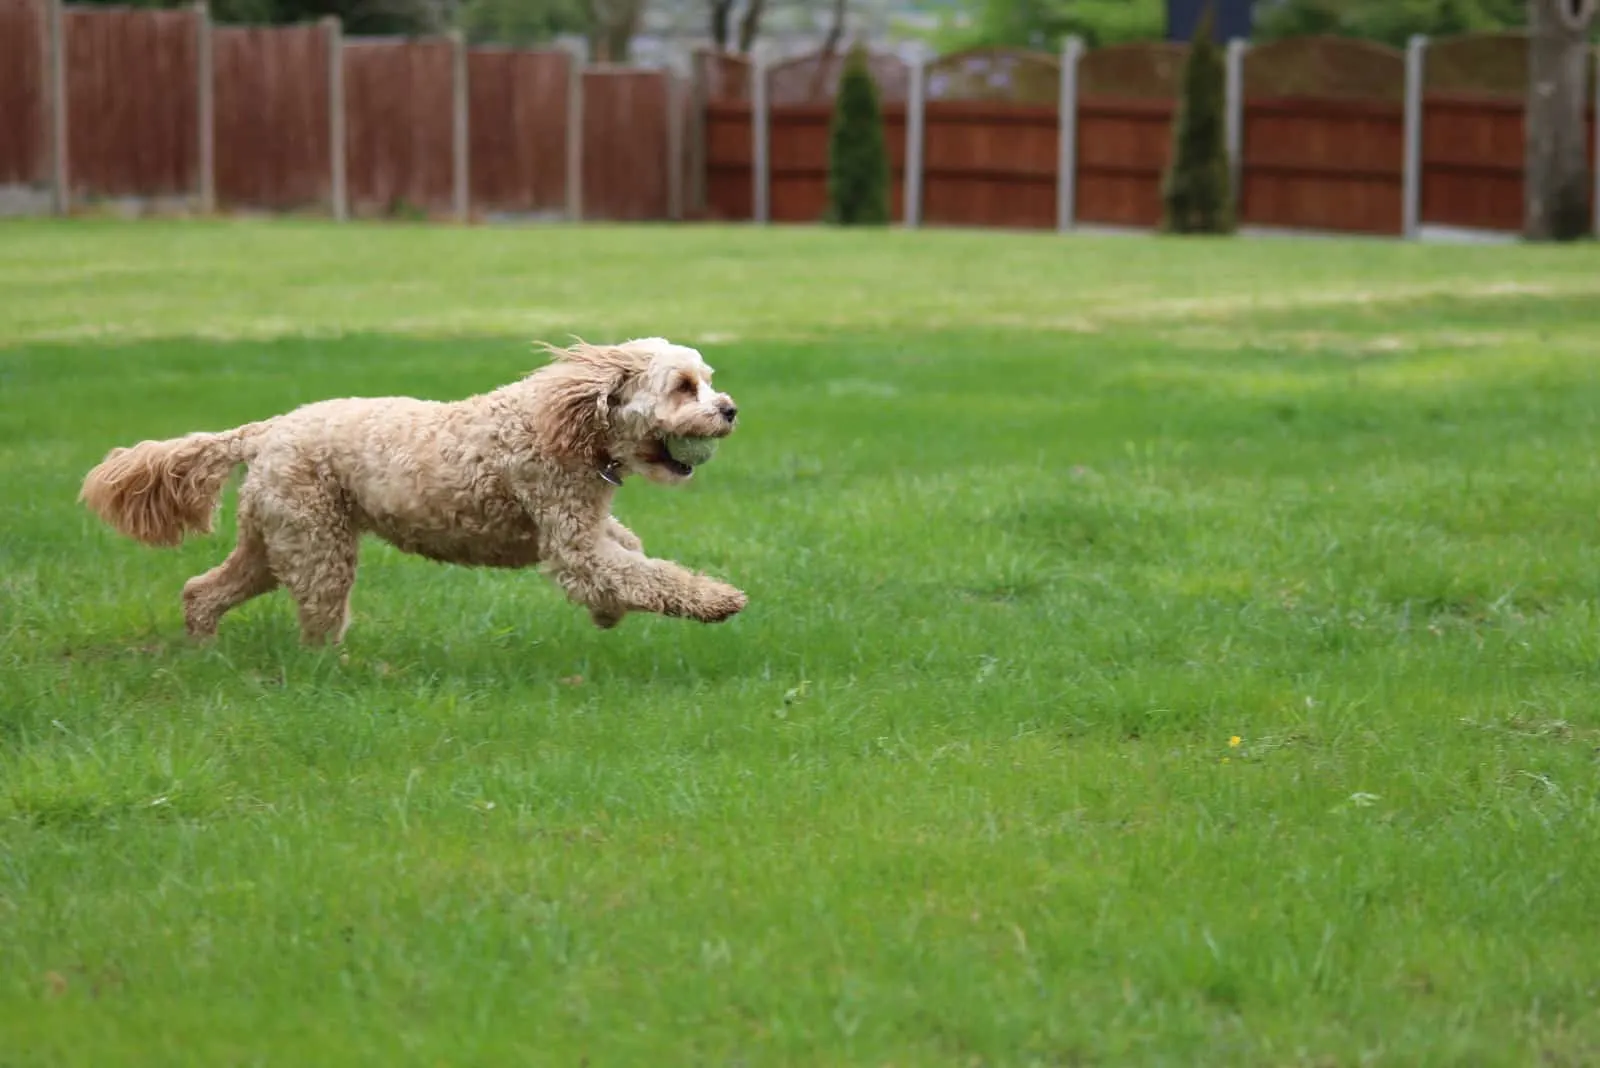 Cavapoo running across field with ball in mouth